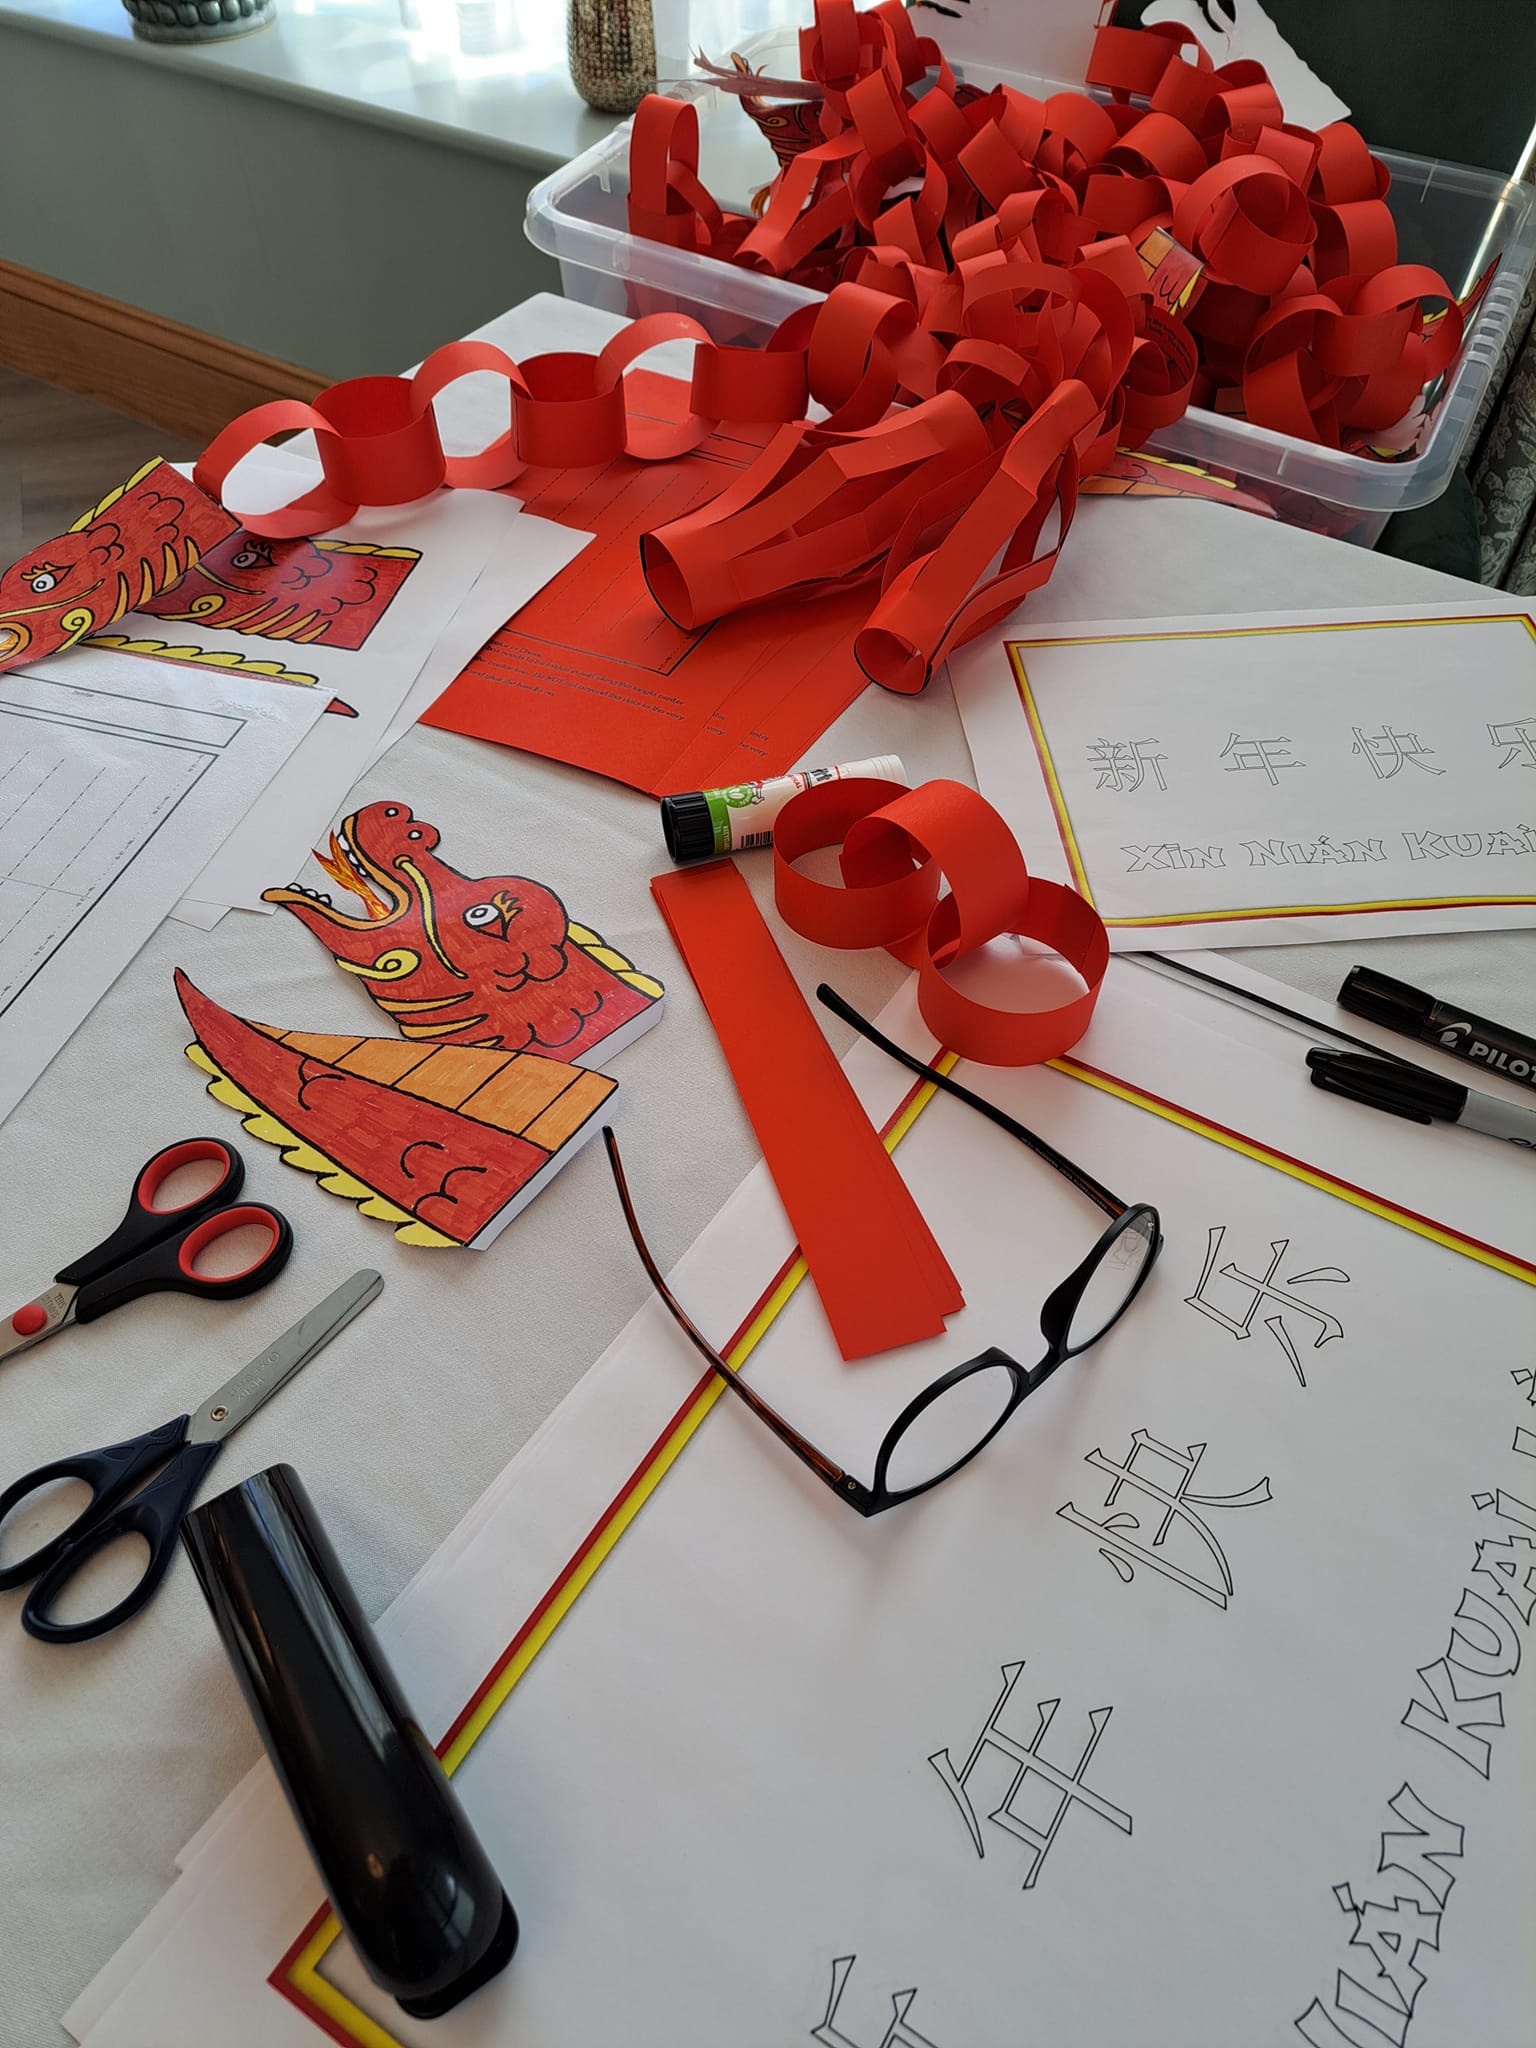 Arts & craft session to make some Chinese new year decorations.